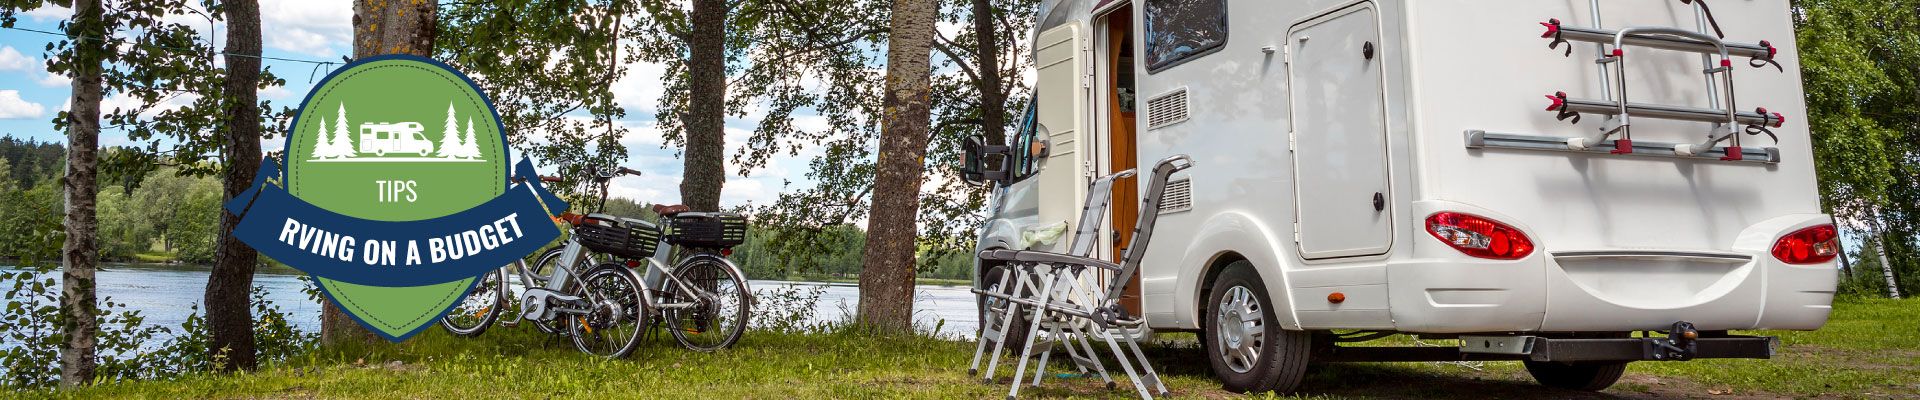 Rving-on-a-budget